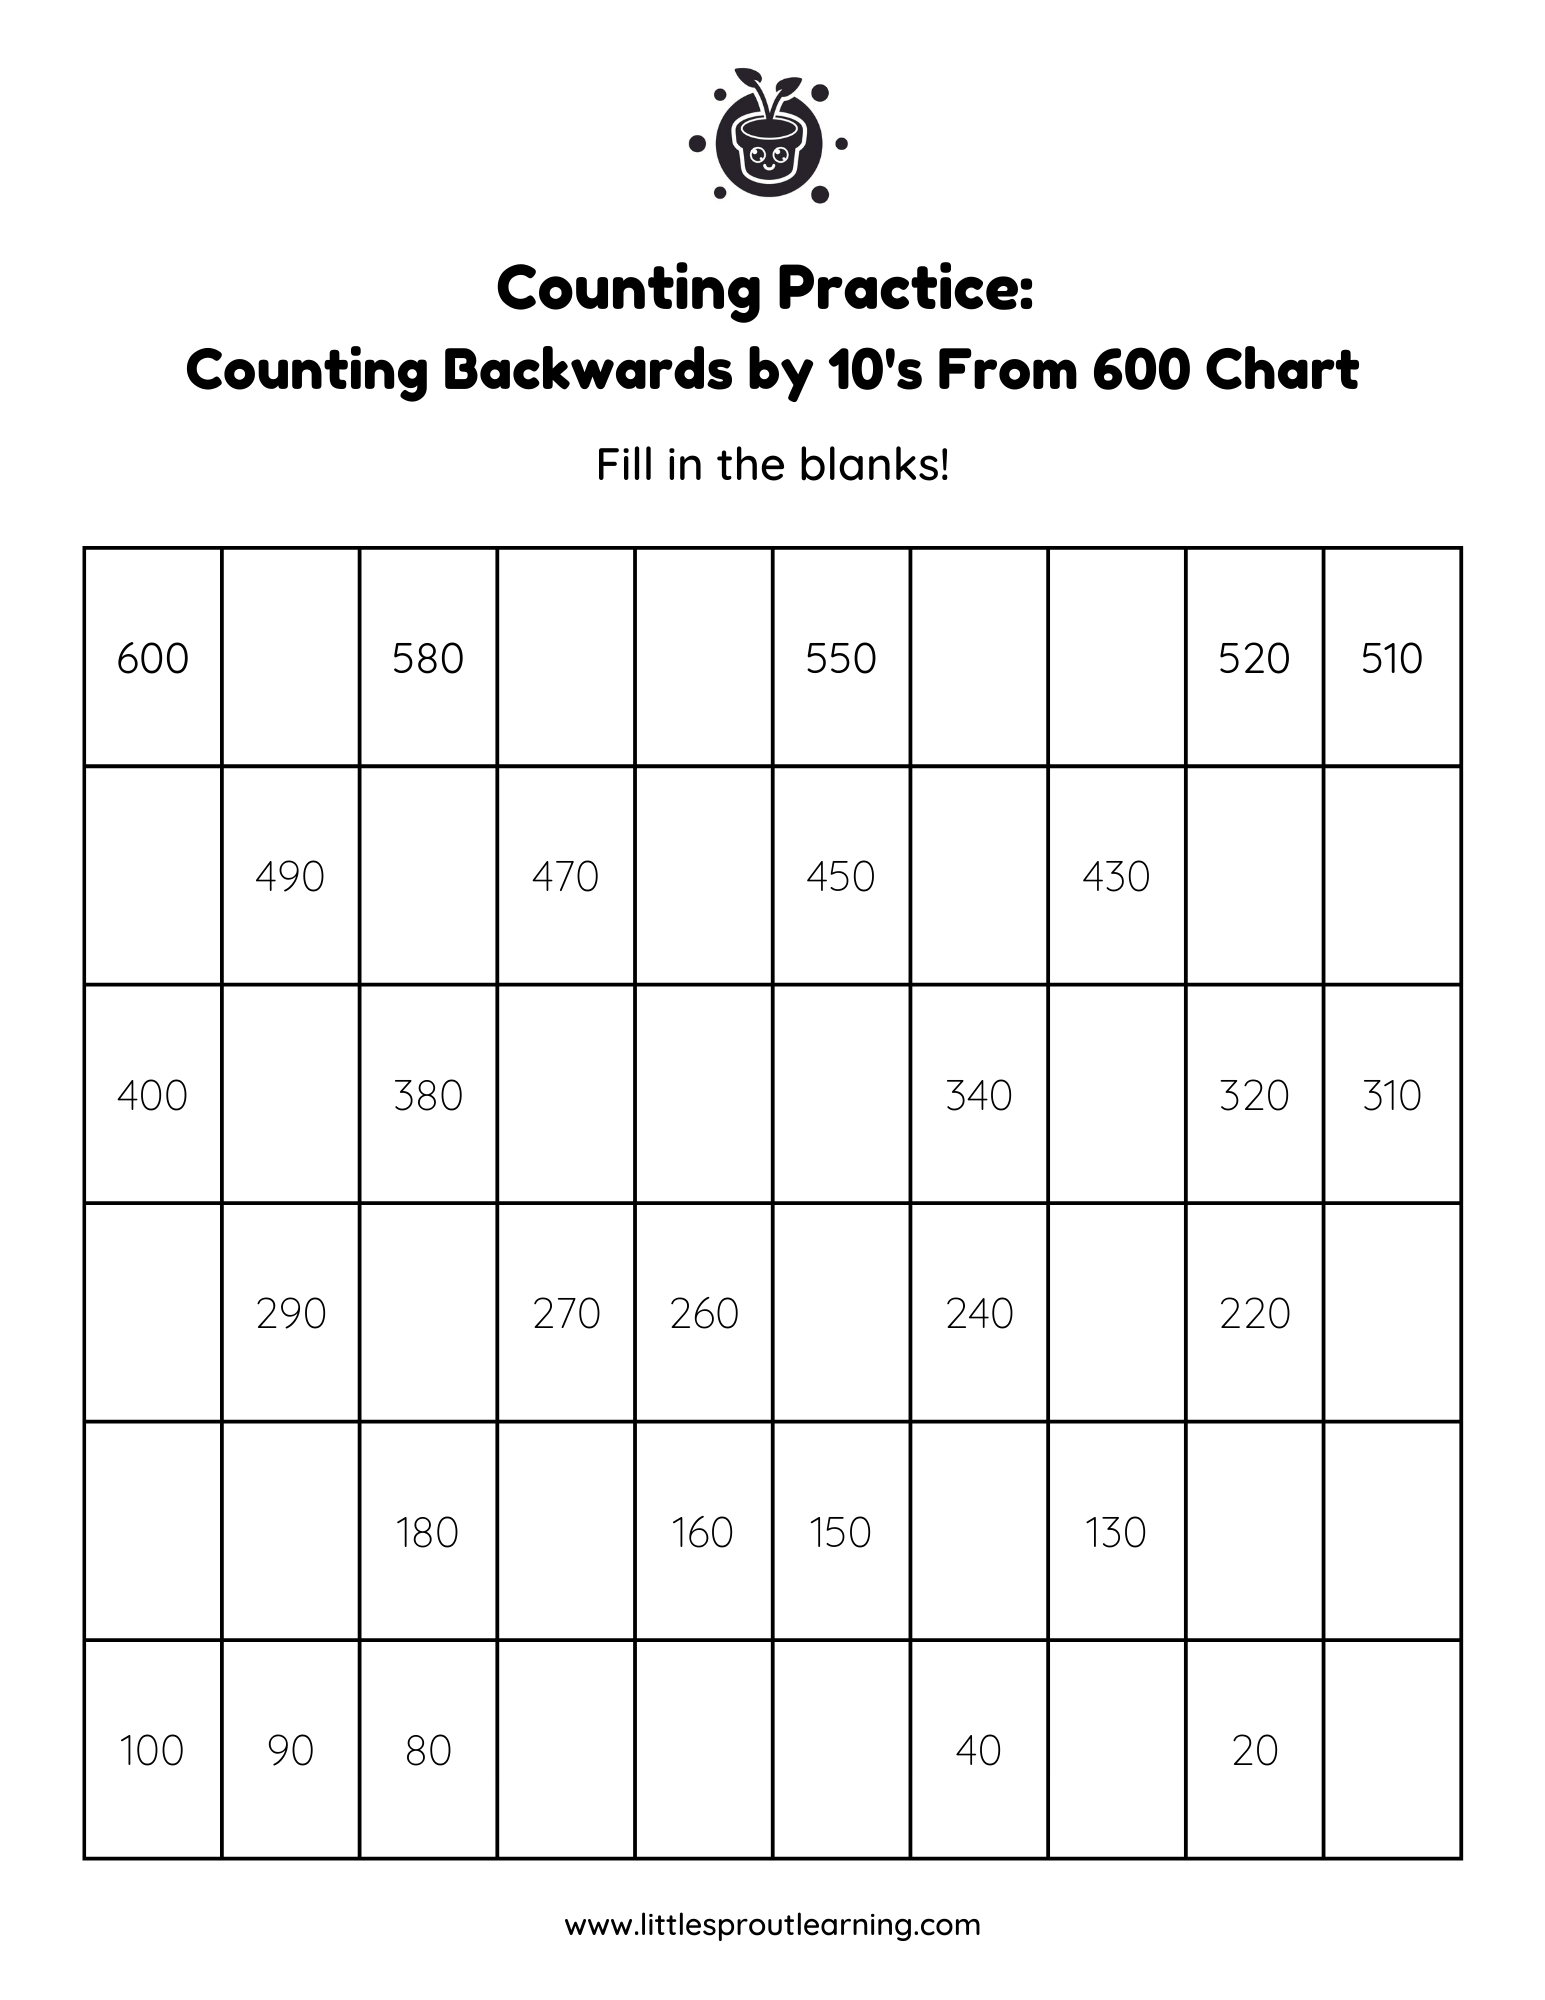 Counting Backwards by 10’s from 600 – Chart